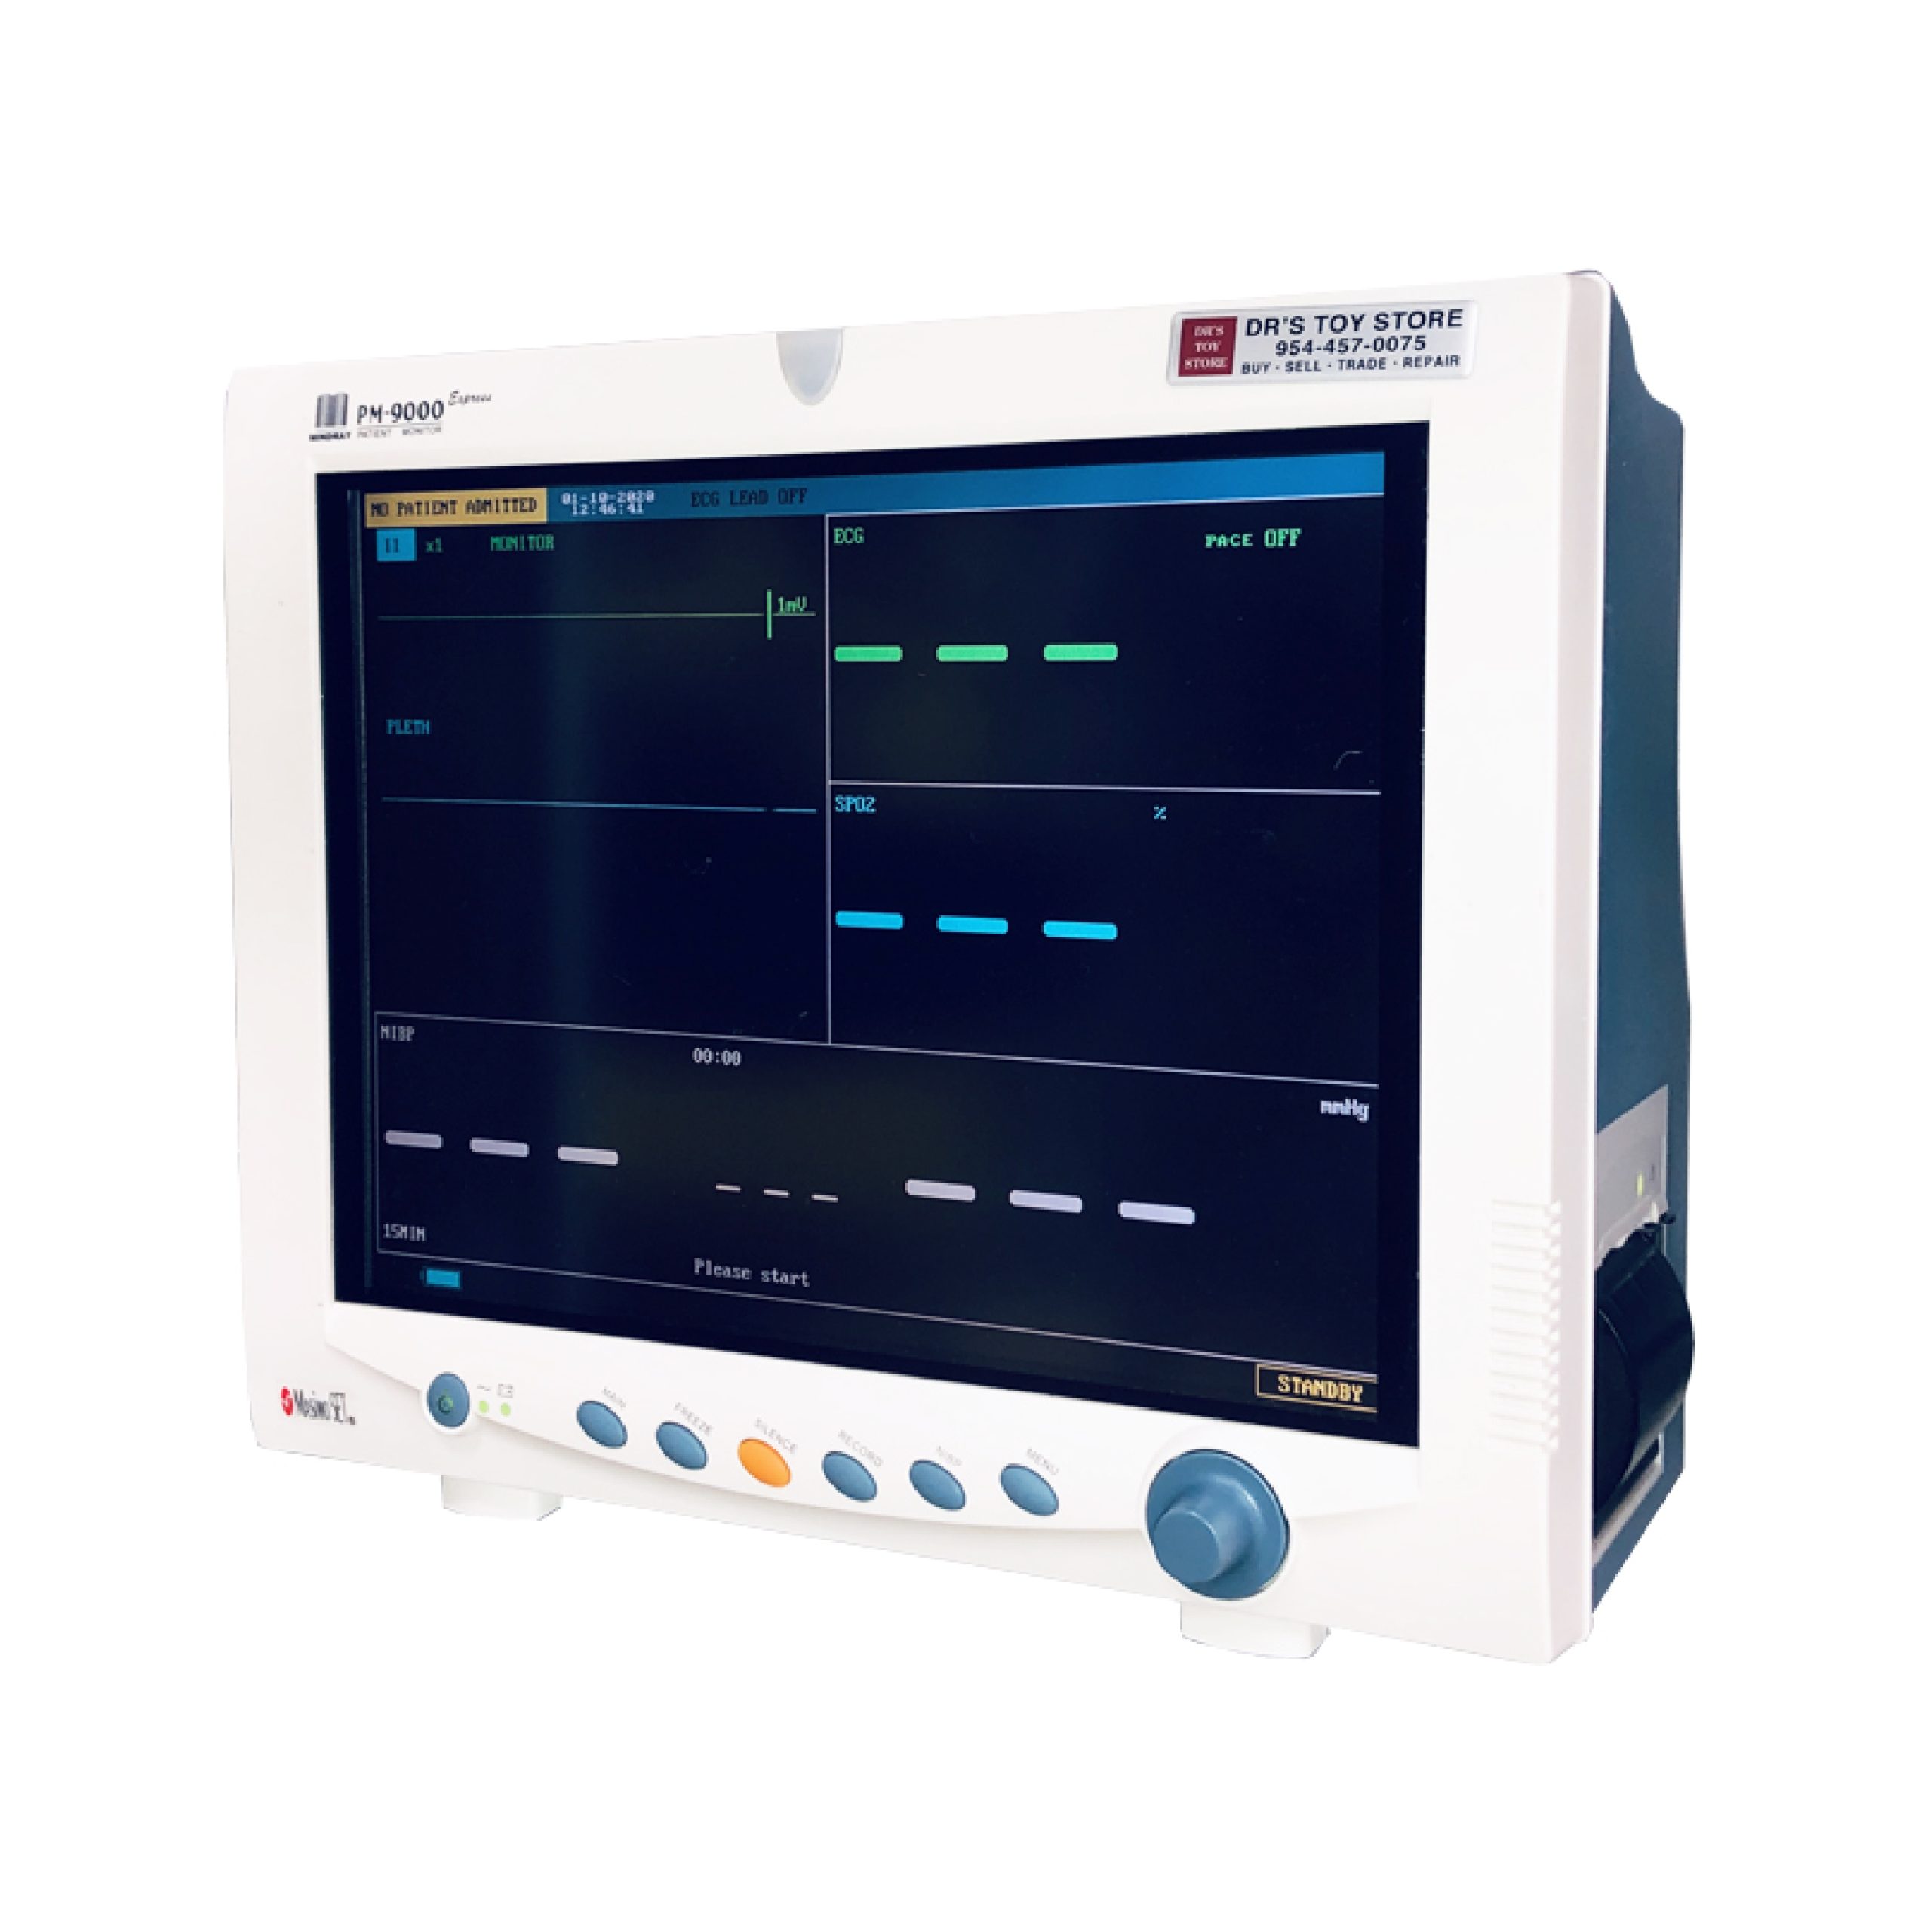 https://www.drstoystore.com/wp-content/uploads/2020/01/PM9000-Express-Patient-Monitor-1-scaled.jpg